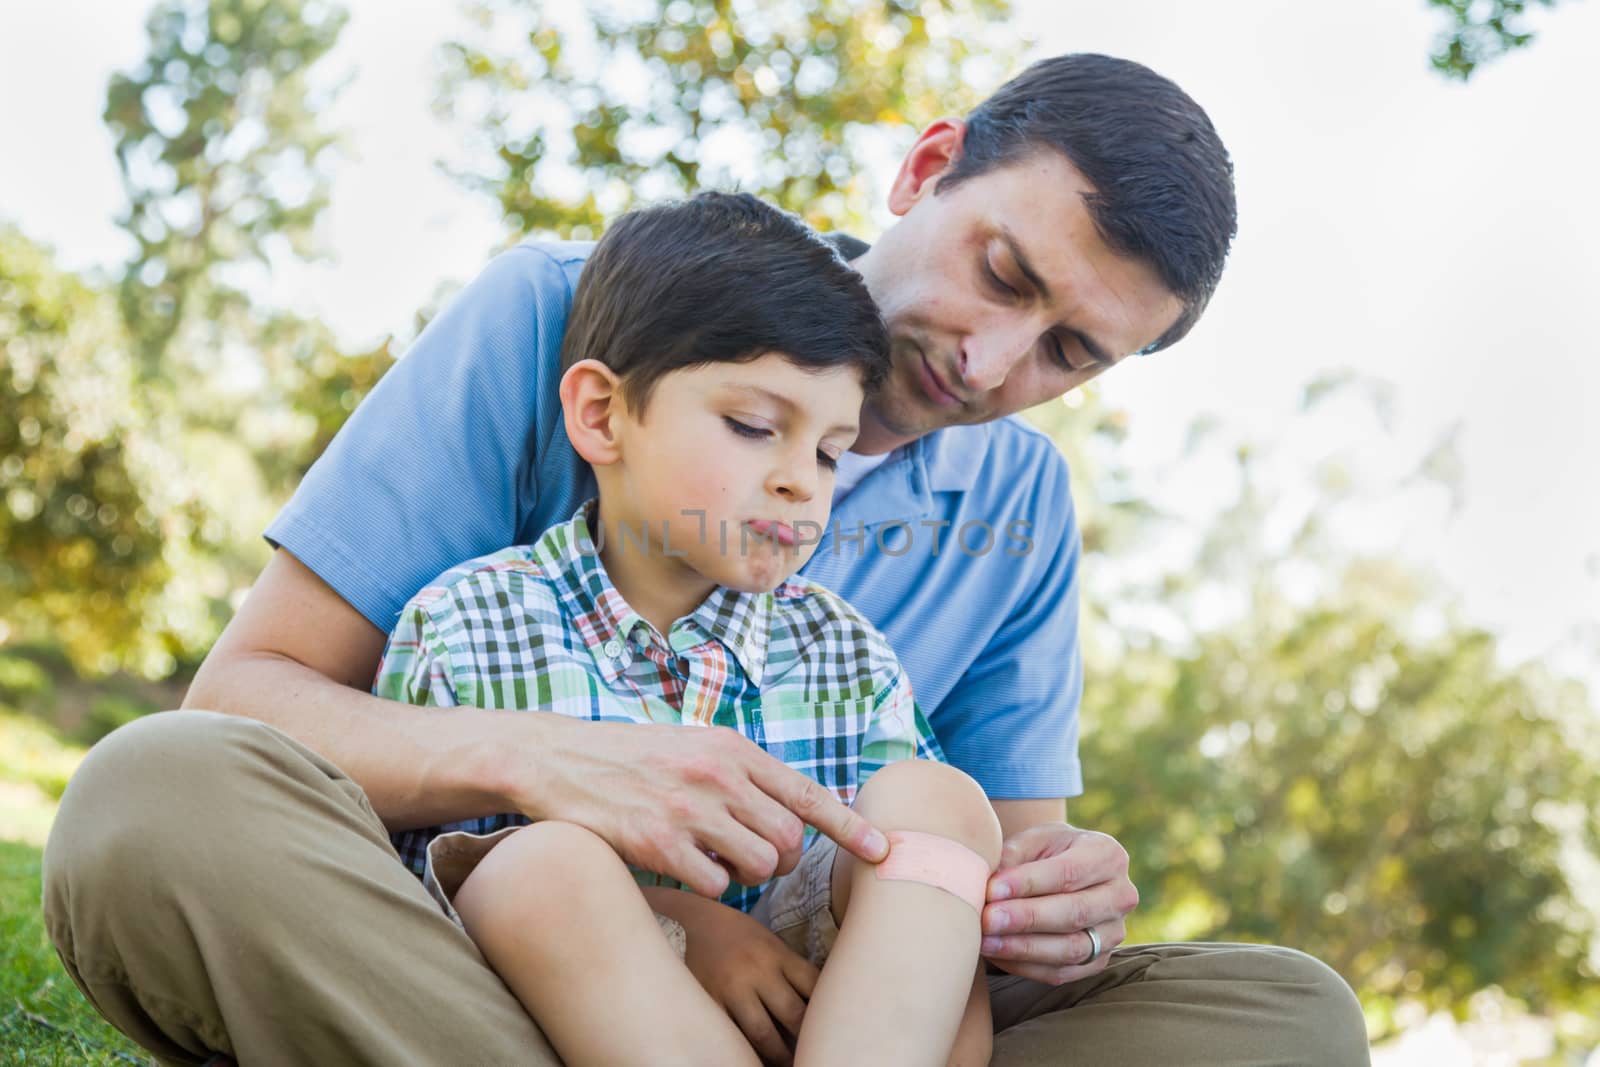 Loving Father Puts a Bandage on the Elbow of His Young Son in the Park.